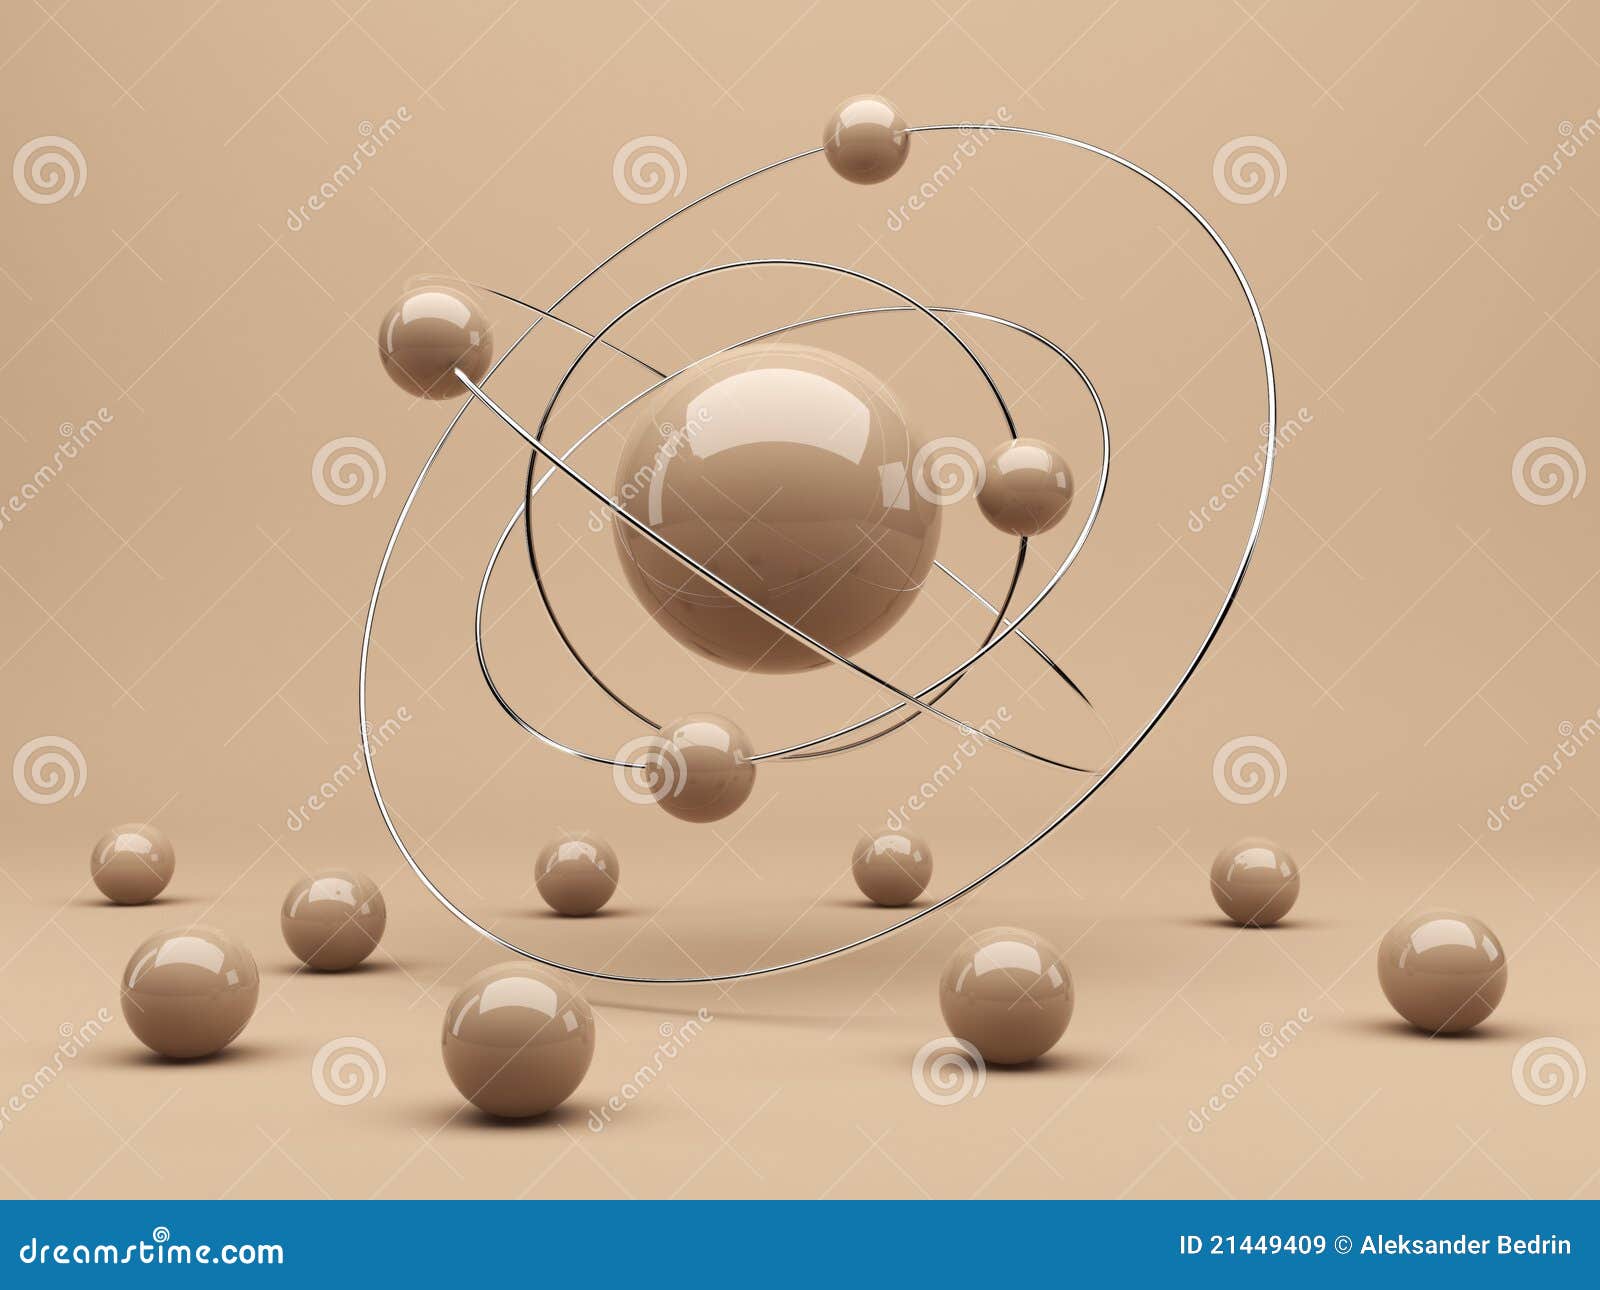 spheres 3d. interaction. abstract background